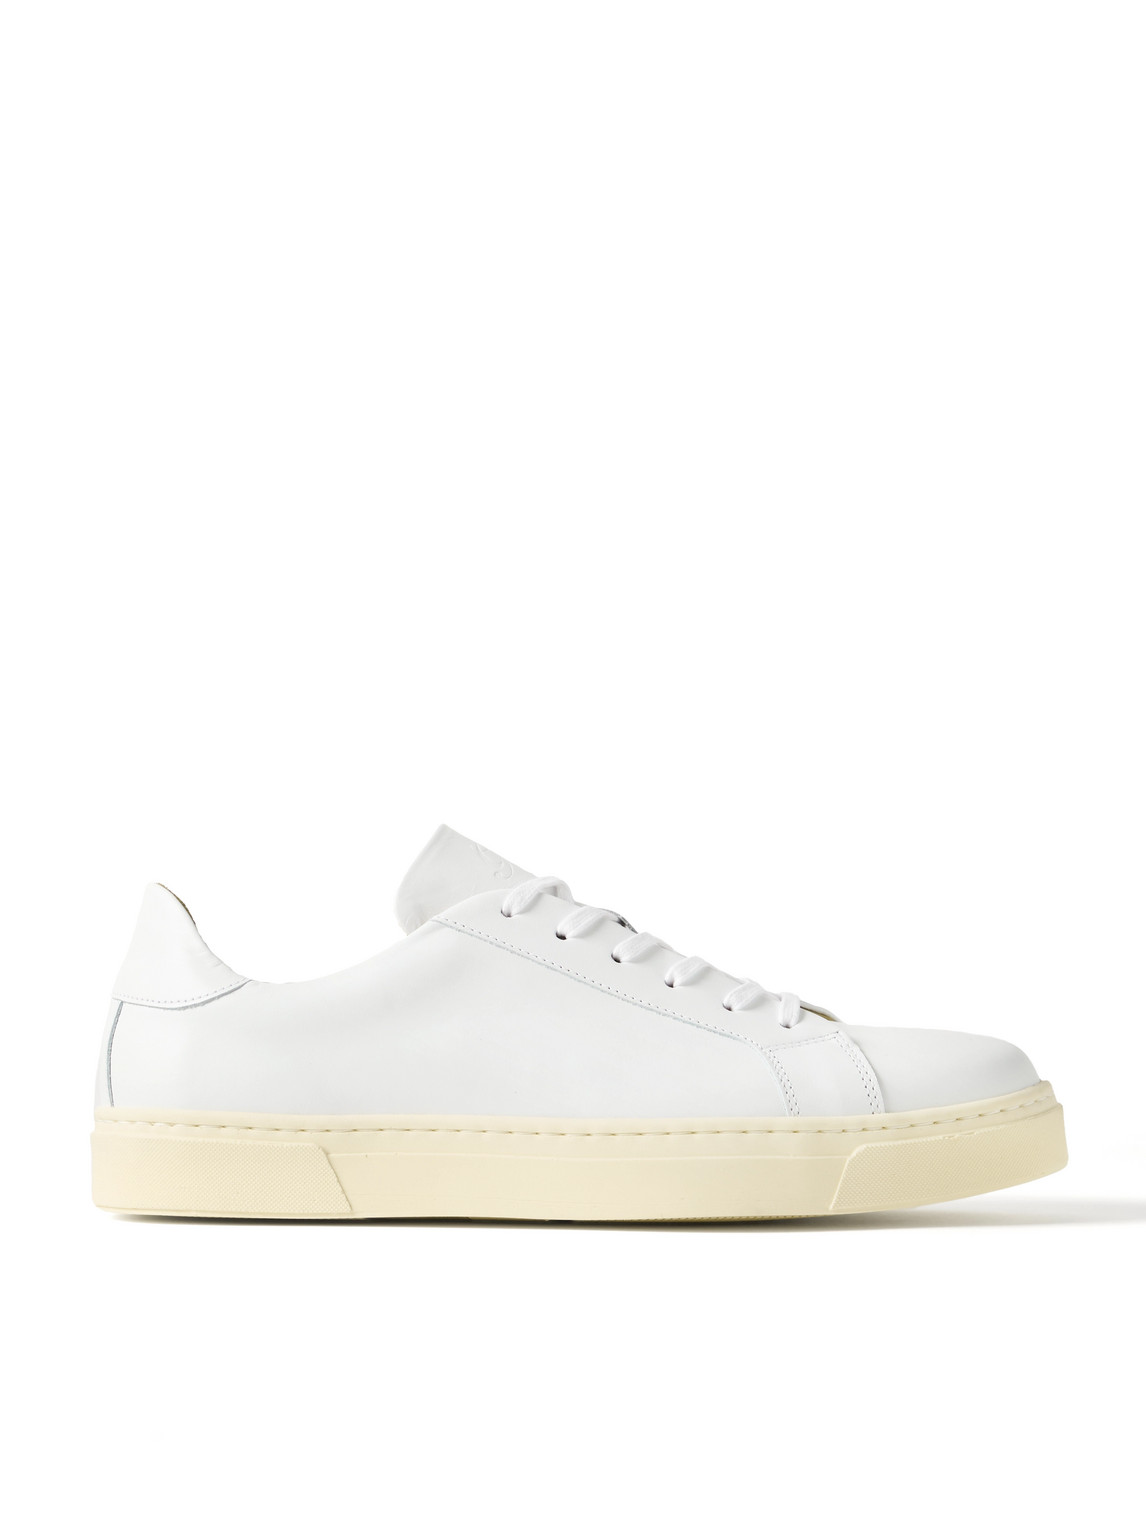 George Cleverley Jack Ii Leather Sneakers In White